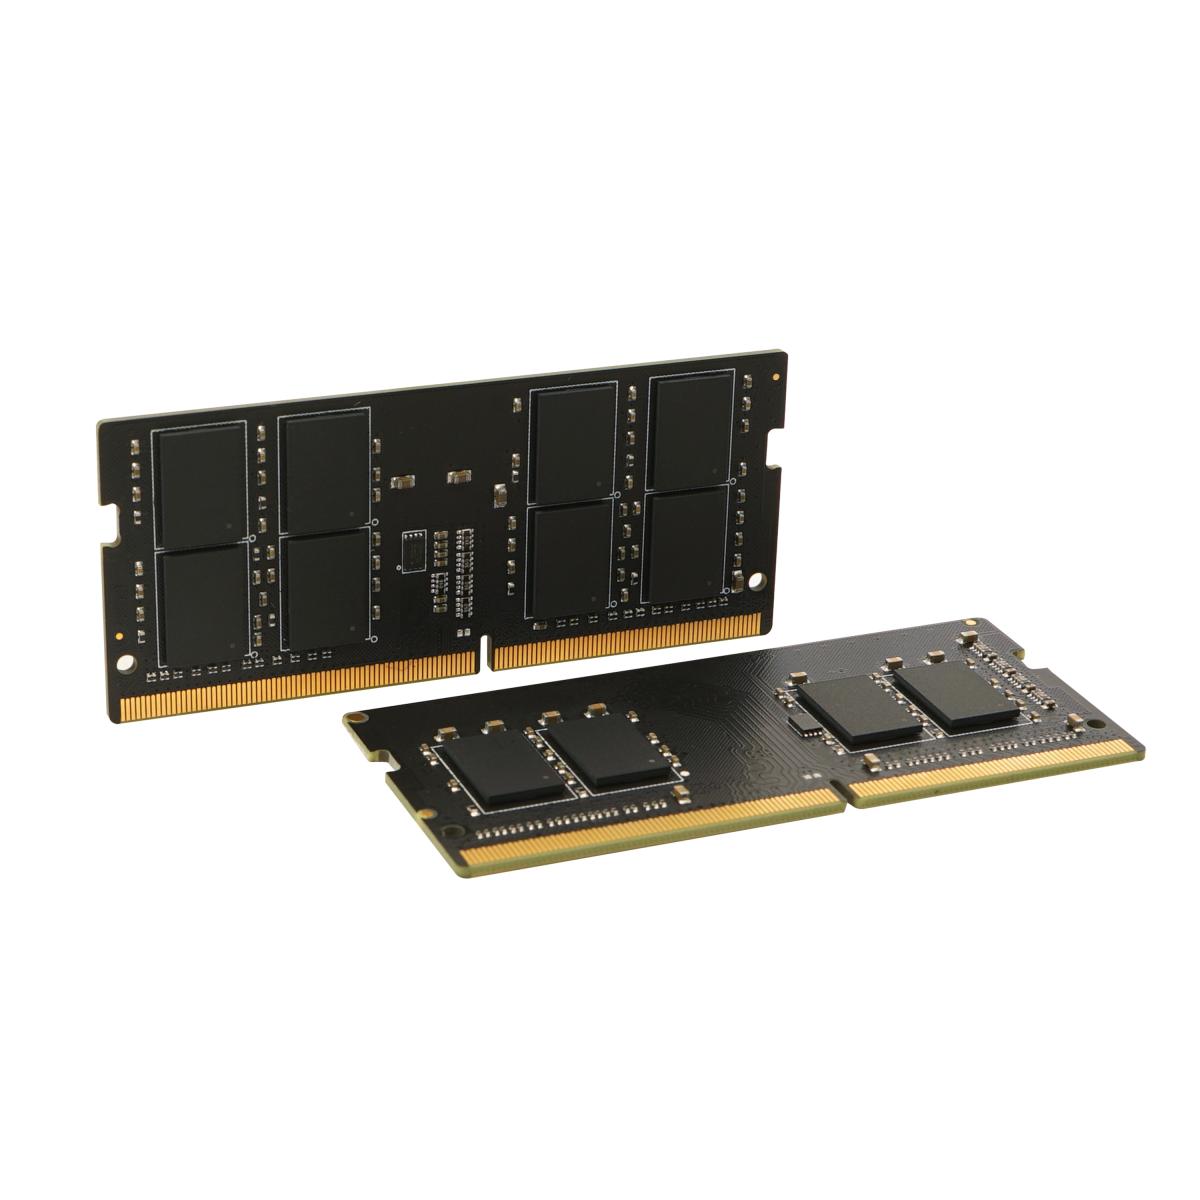 Silicon Power 32GB DDR4 SODIMM-3200 MHz For Laptop